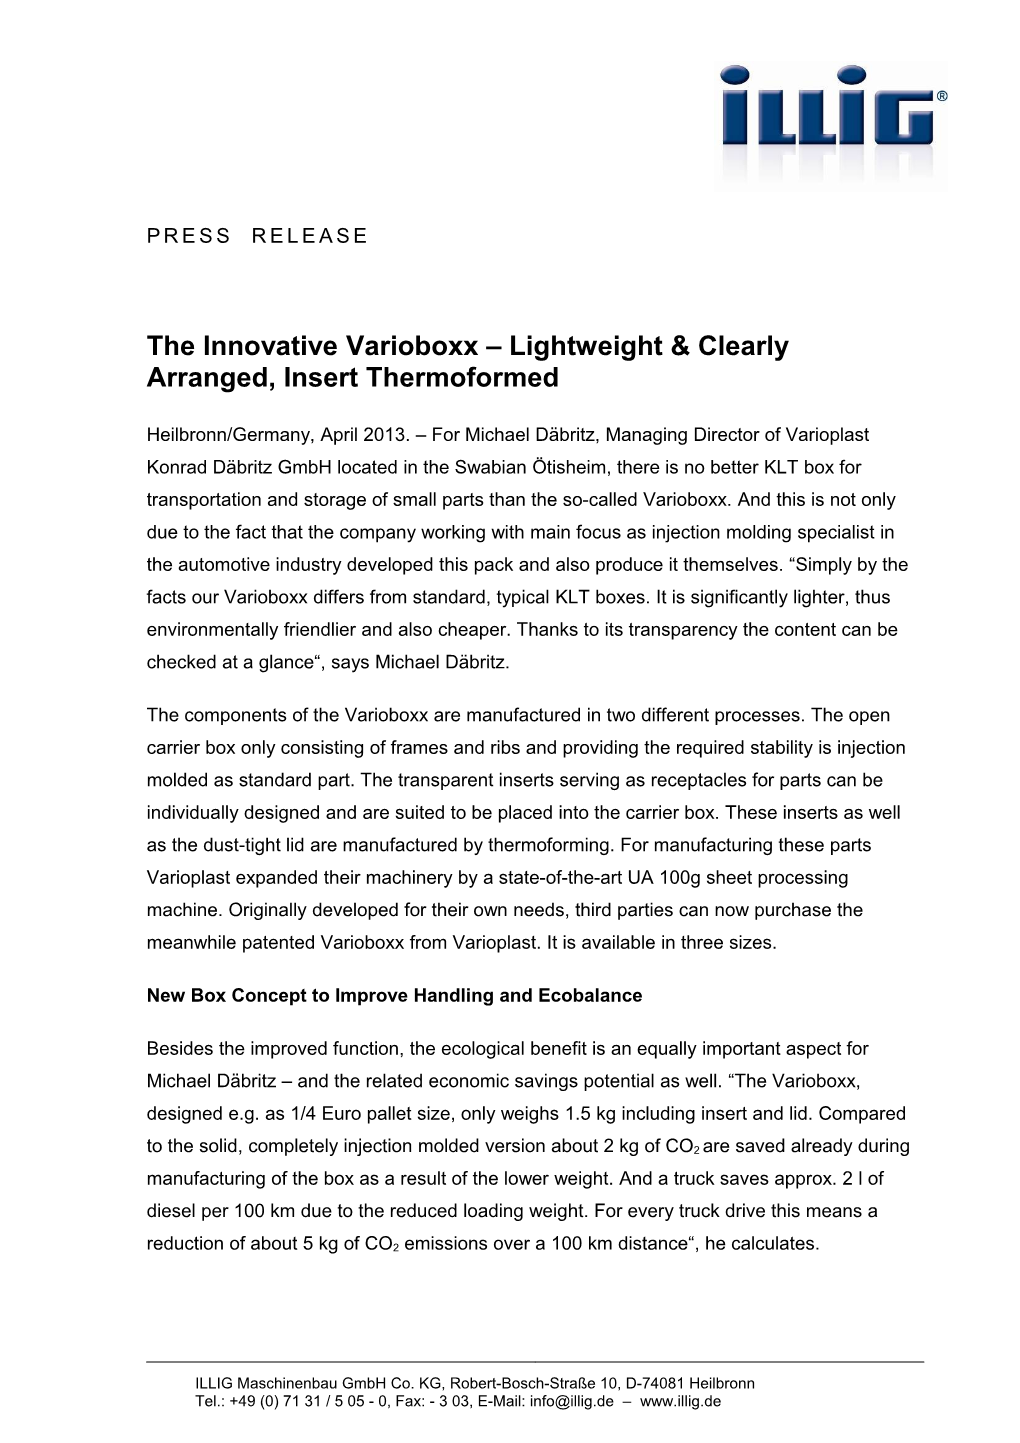 Page1of Press Release: the Innovative Varioboxx Lightweight & Clearly Arranged, Insert